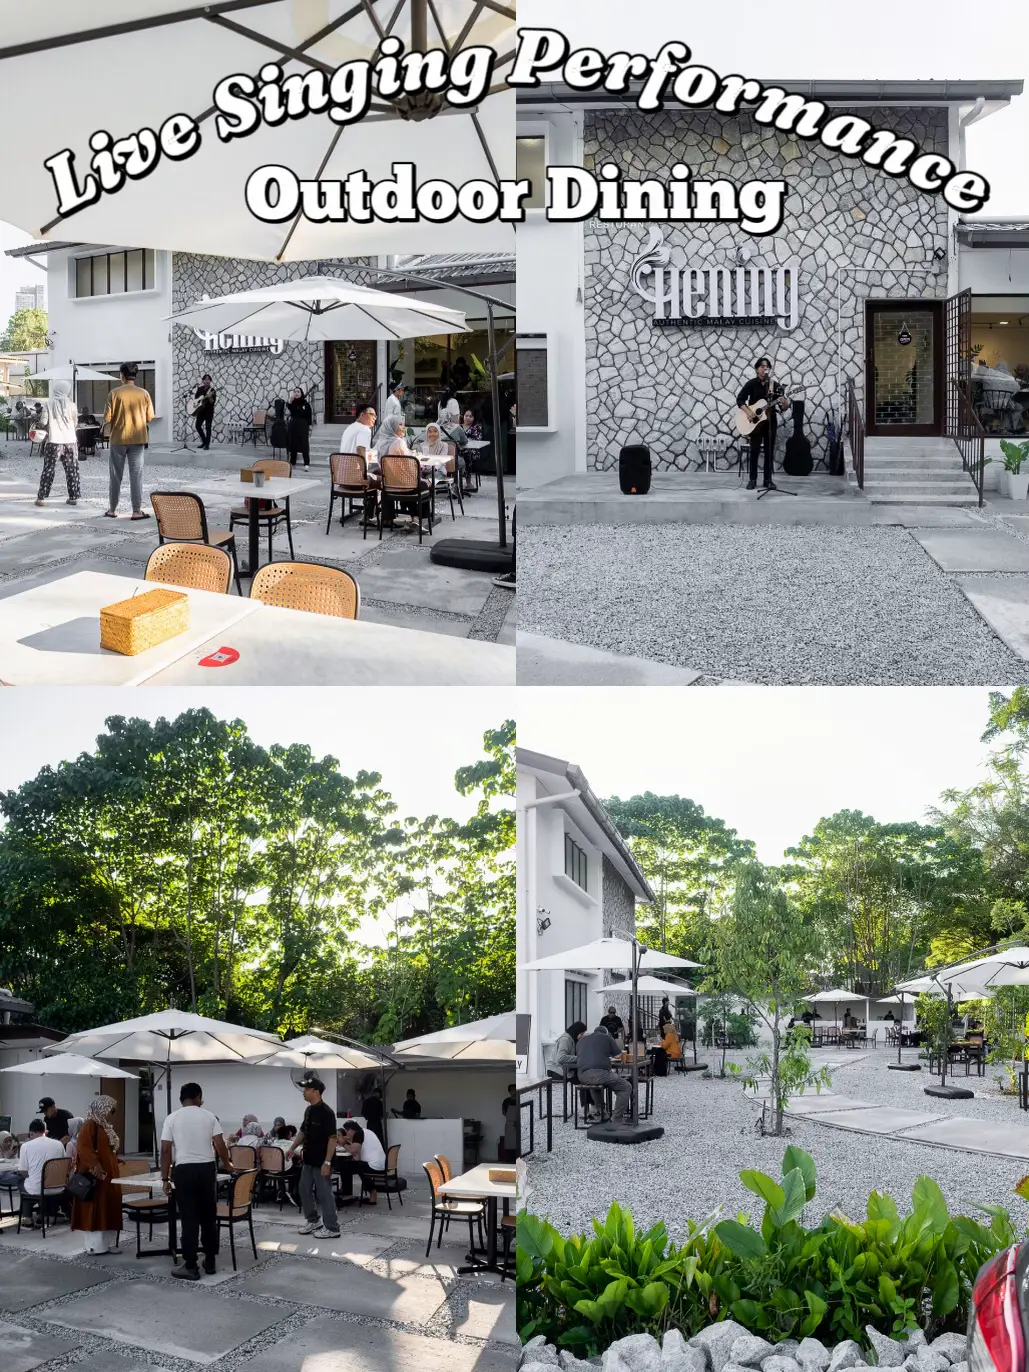 🎶HALAL OUTDOOR DINING ➕ LIVE SINGING PERFORMANCE🎵's images